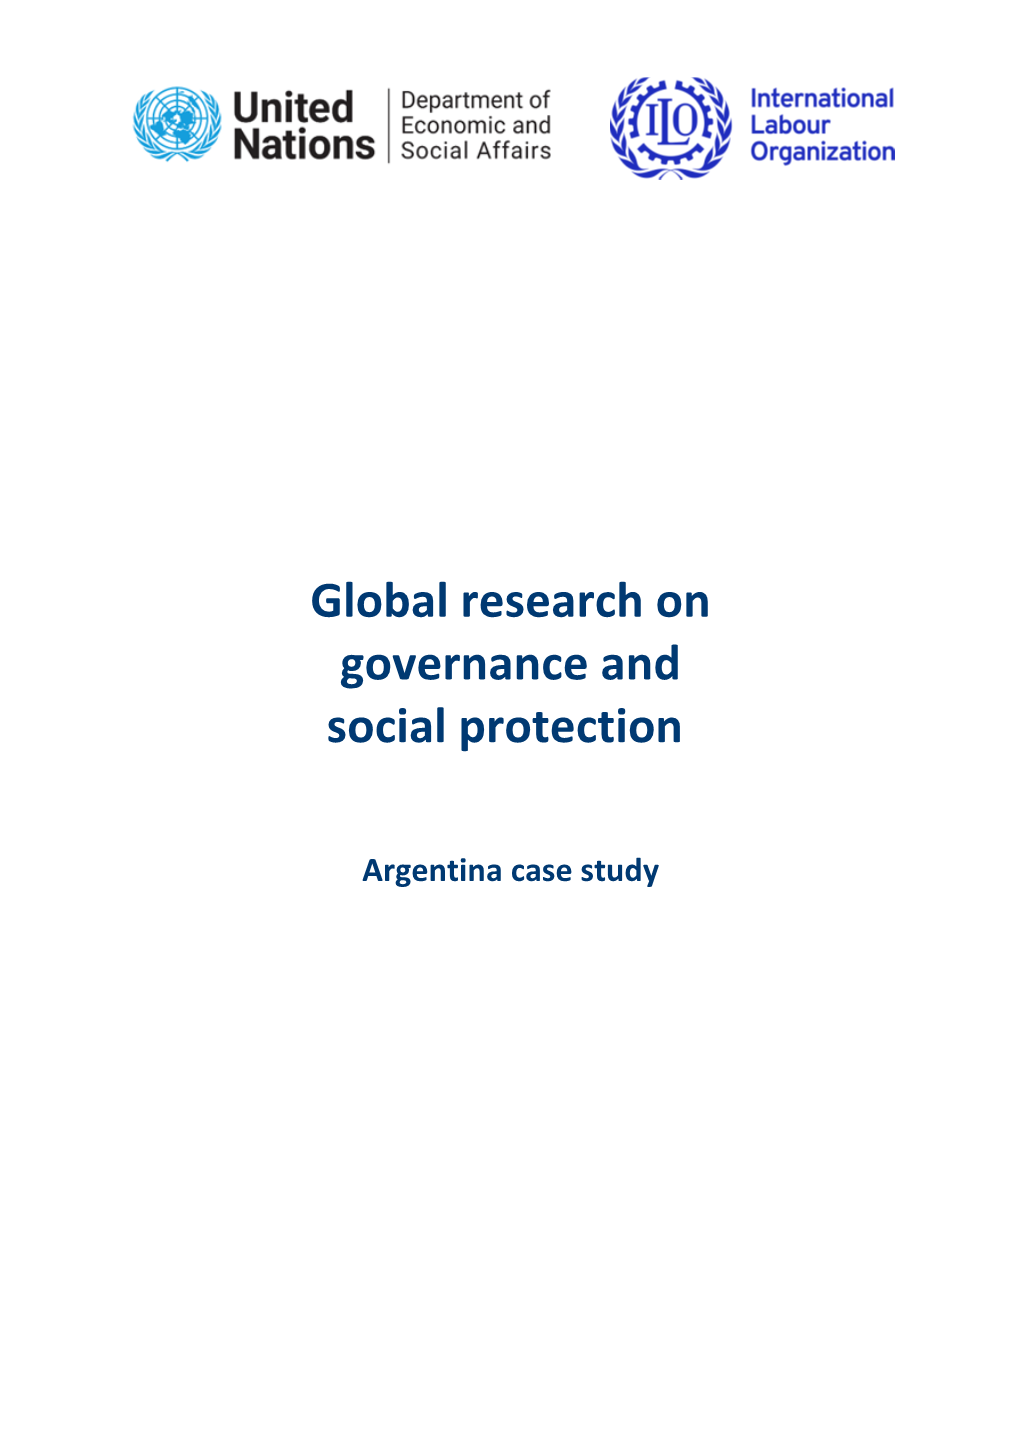 Global Research on Governance and Social Protection